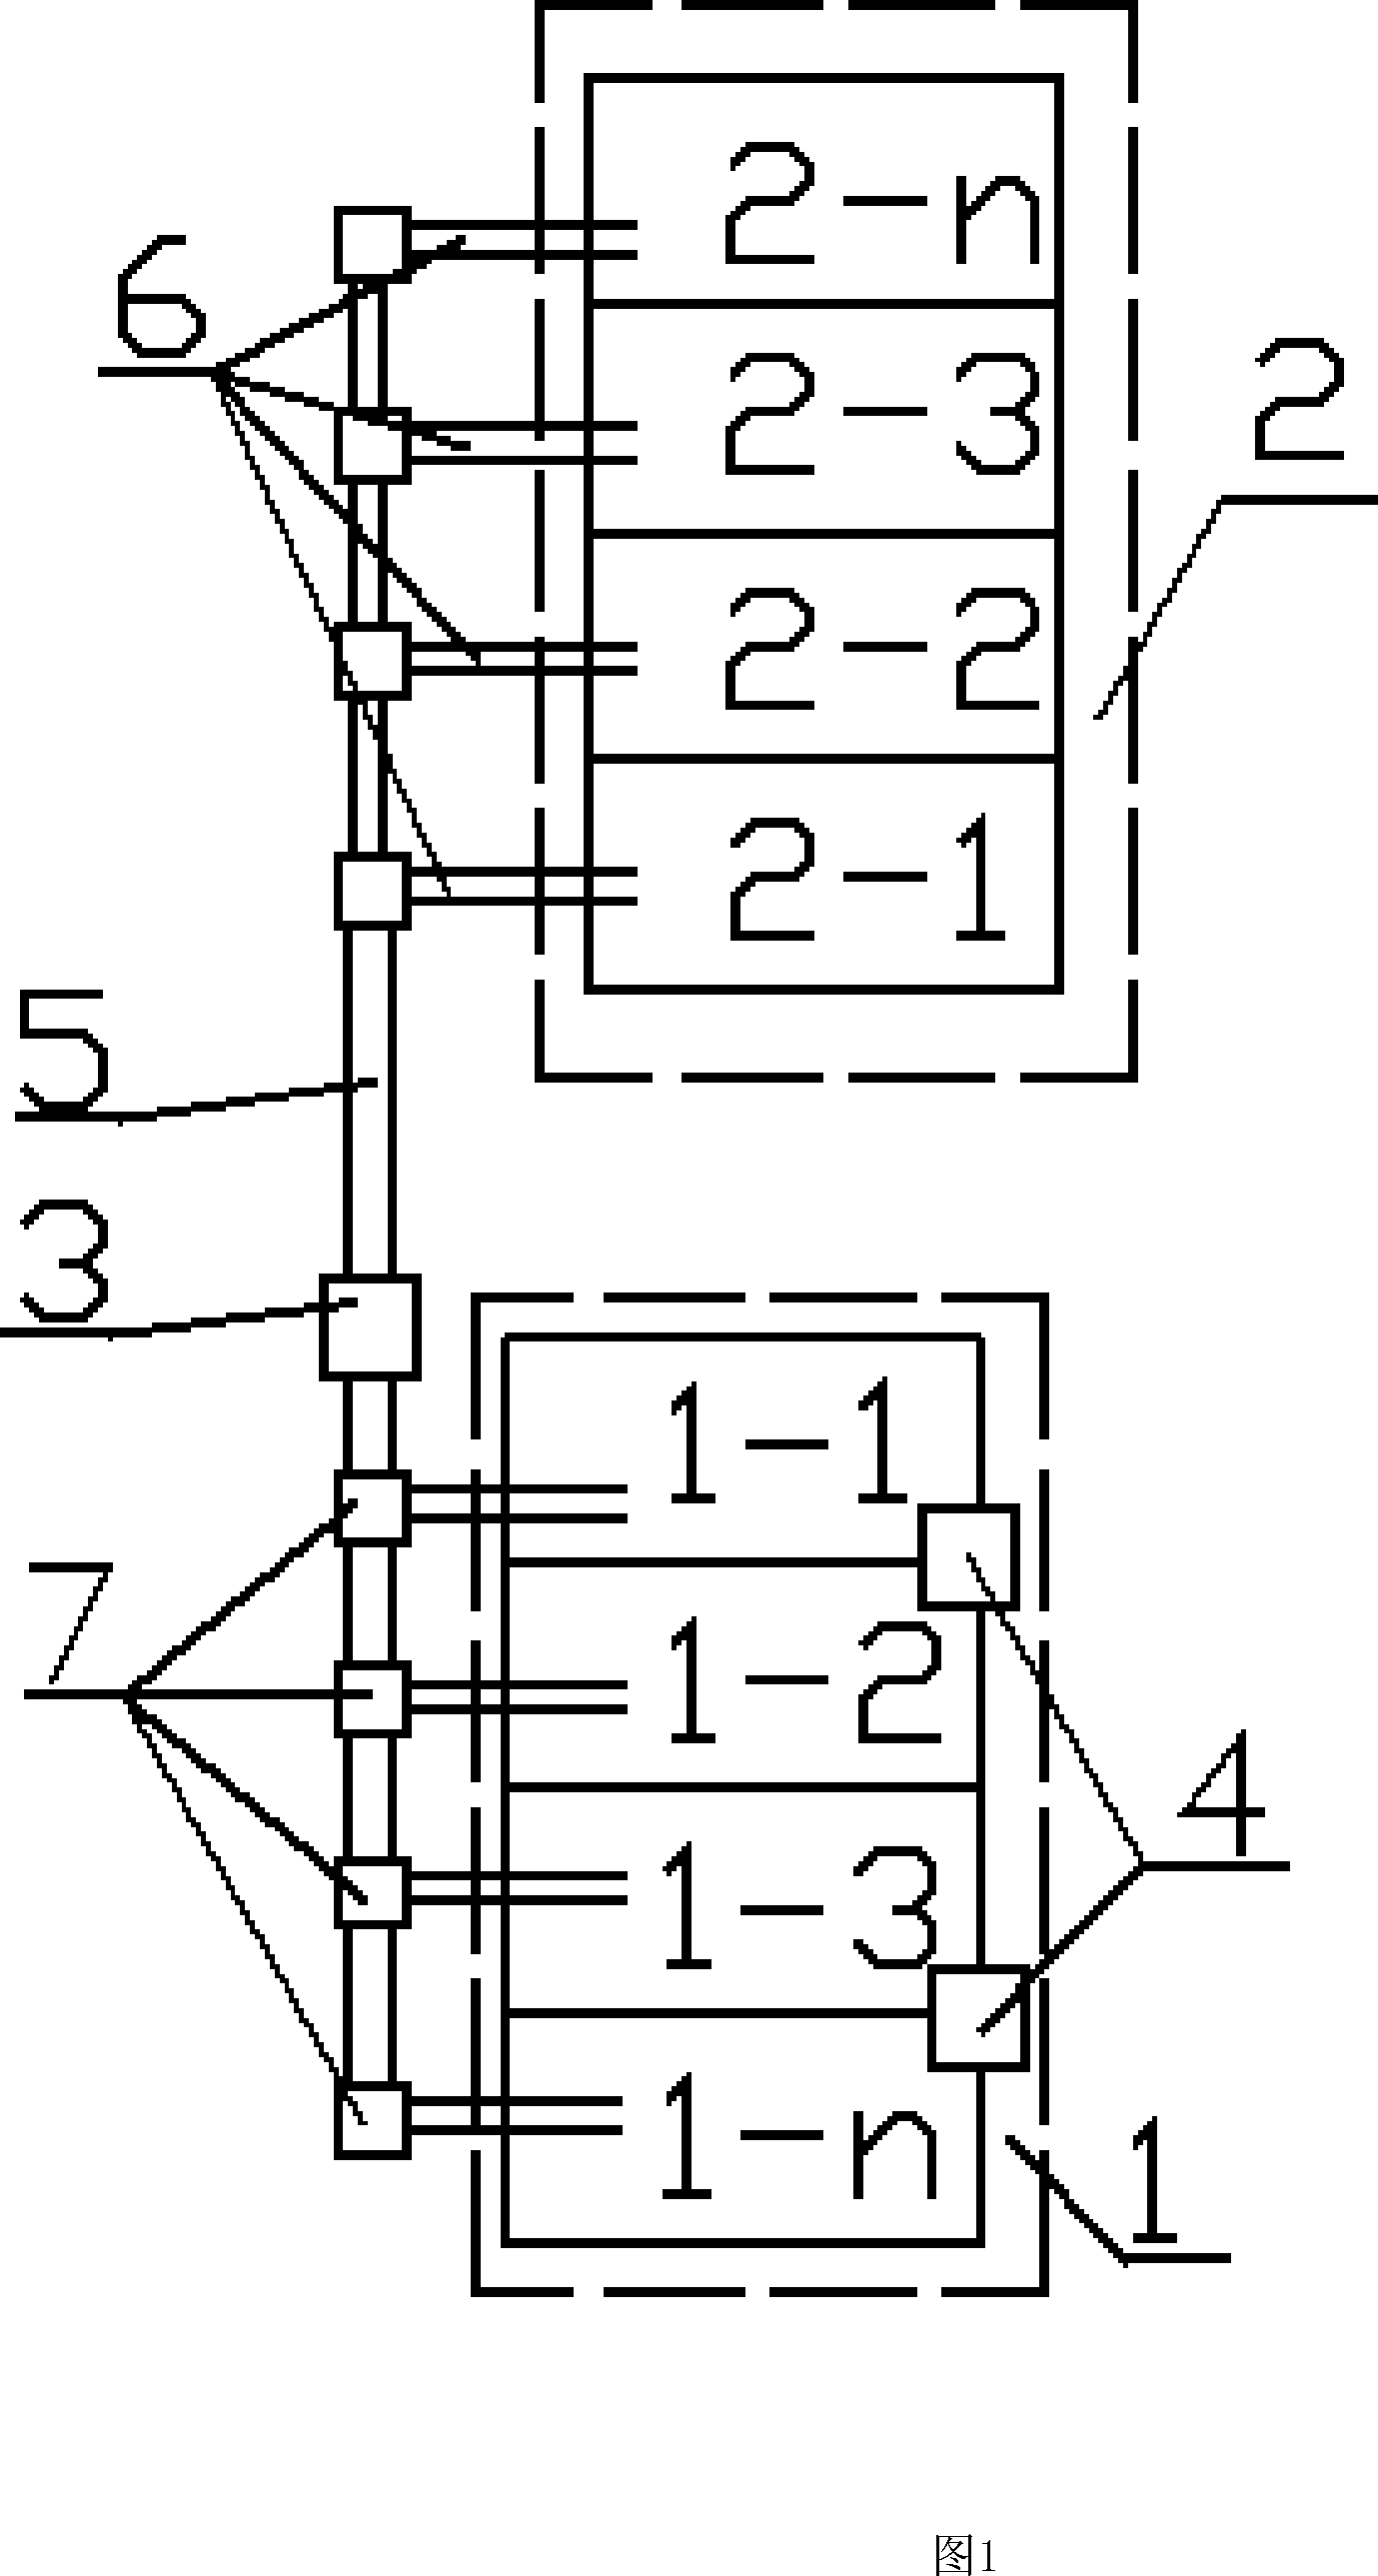 Configuration of boiler house in alumina plant